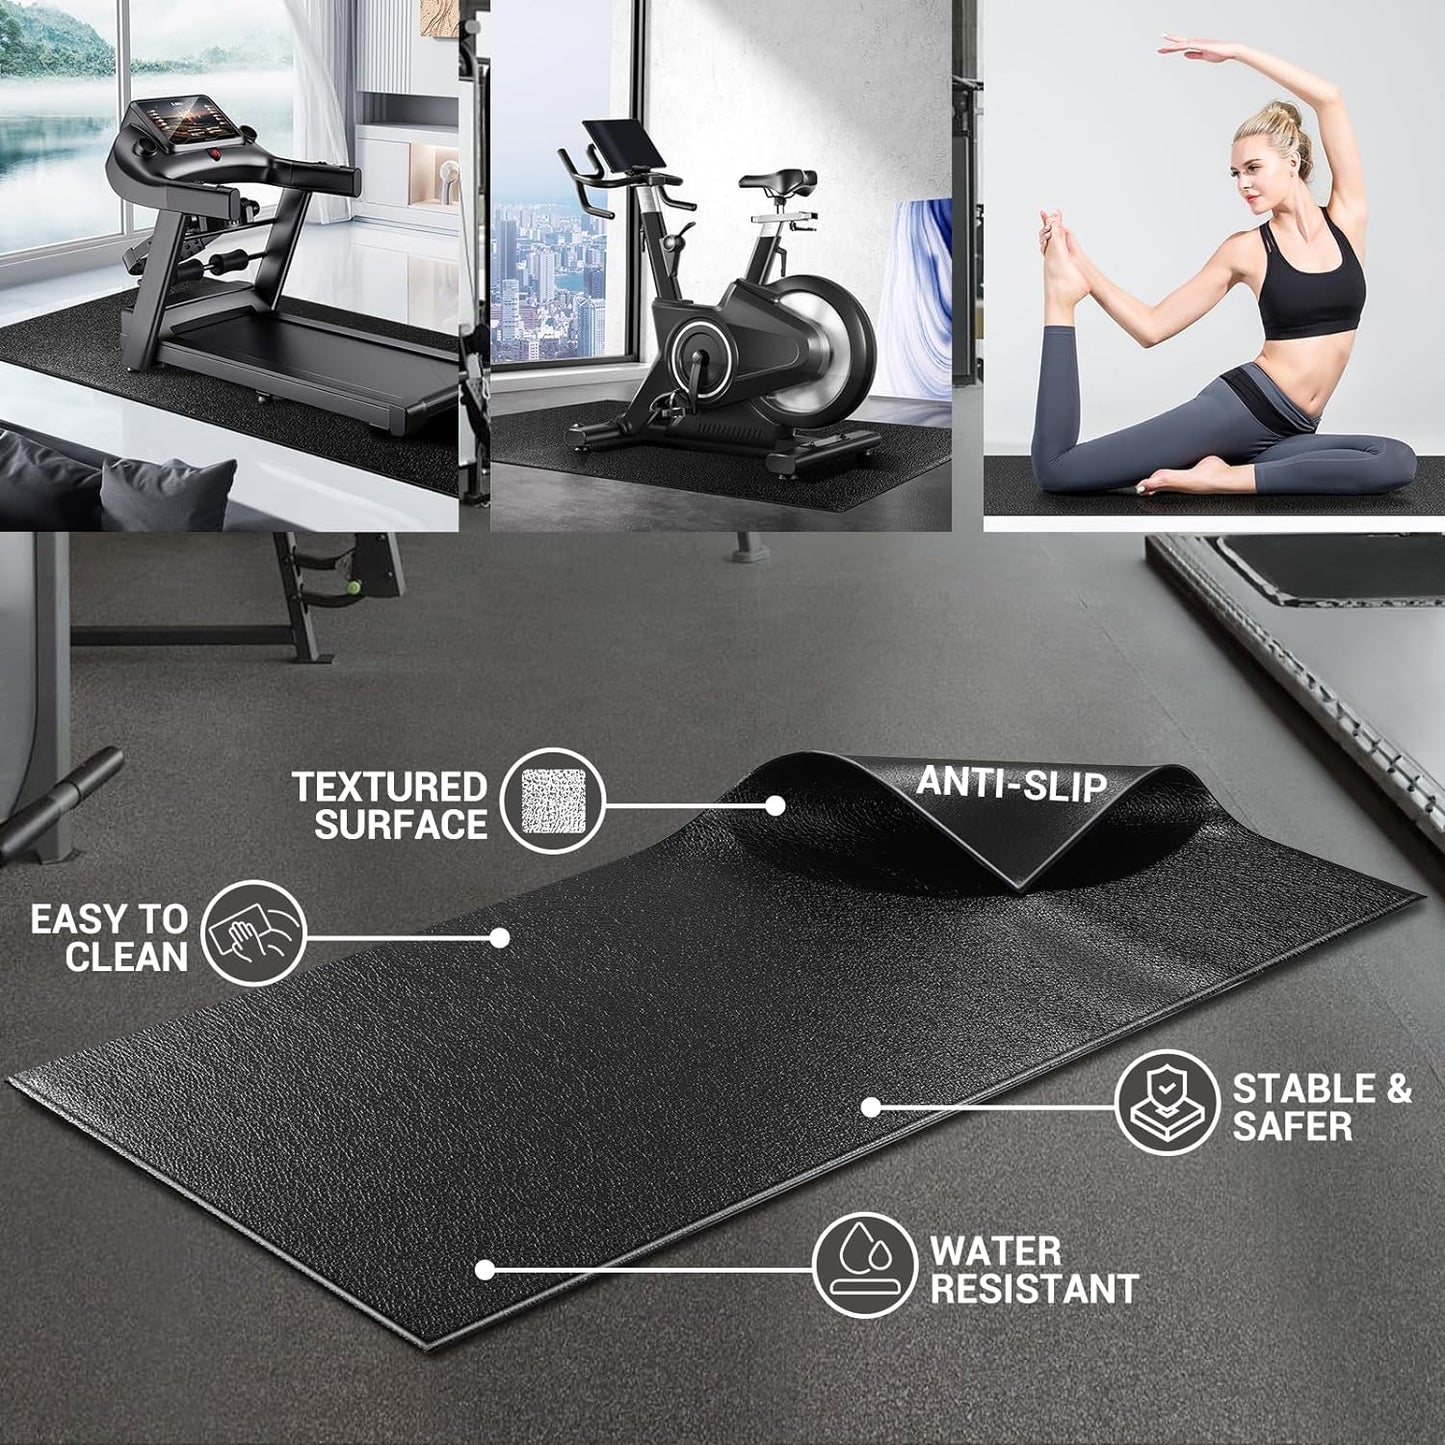 Treadmills Mat for Health & Fitness Exercise Equipment Mat- anti Fatigue Floor Mat, 6Mm Thick, Fitness Mat, Elliptical Mat, Jump Rope Mat, Gym Mat Used on Hard Floors and Carpet Protection 36"X60"